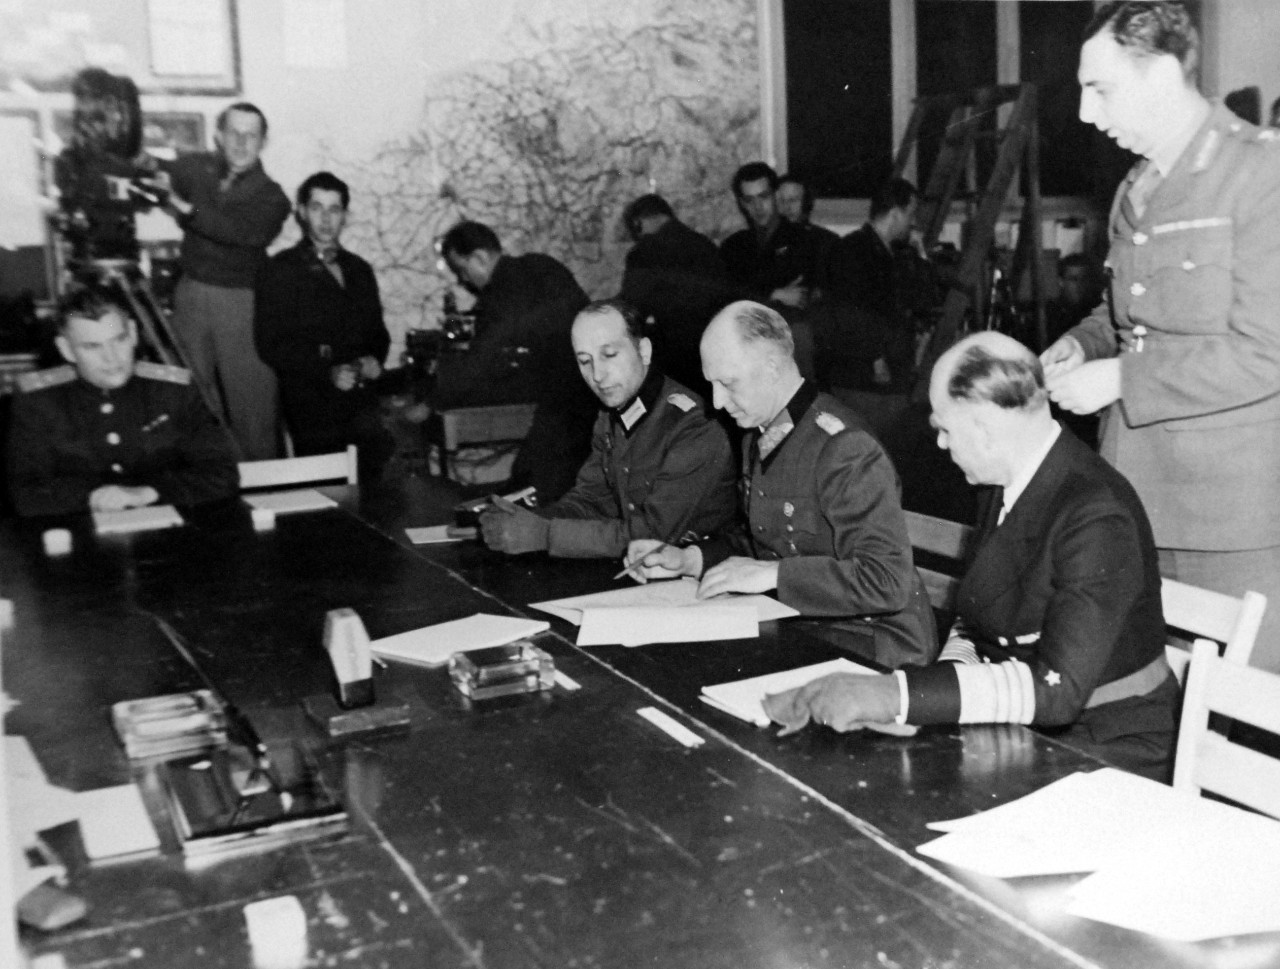 111-SC-27261: Surrender of Germany, 7 May 1945. Colonel General Alfred Jodl, German Chief of Staff, under the Doenitz Regime, is here shown signing the document of “Unconditional Surrender” under which all remaining forces of the German army are bound to lay down their arms in unconditional surrender.  The scene is the War Room of Supreme Headquarters, Allied Expeditionary Forces, Reims, France.  On General Jodl’s left is General Admiral Von Friedeburg, of the Germany Navay, and on his right is Major Wilhelm Oxenius, of the German General Staff.  Standing behind General Admiral Von Friedenburg is Major General K.W.D. Strong, G-2, SHAEF. U.S. Army Photograph.  Courtesy of the Library of Congress Collection, Lot-8988. (2015/10/16).